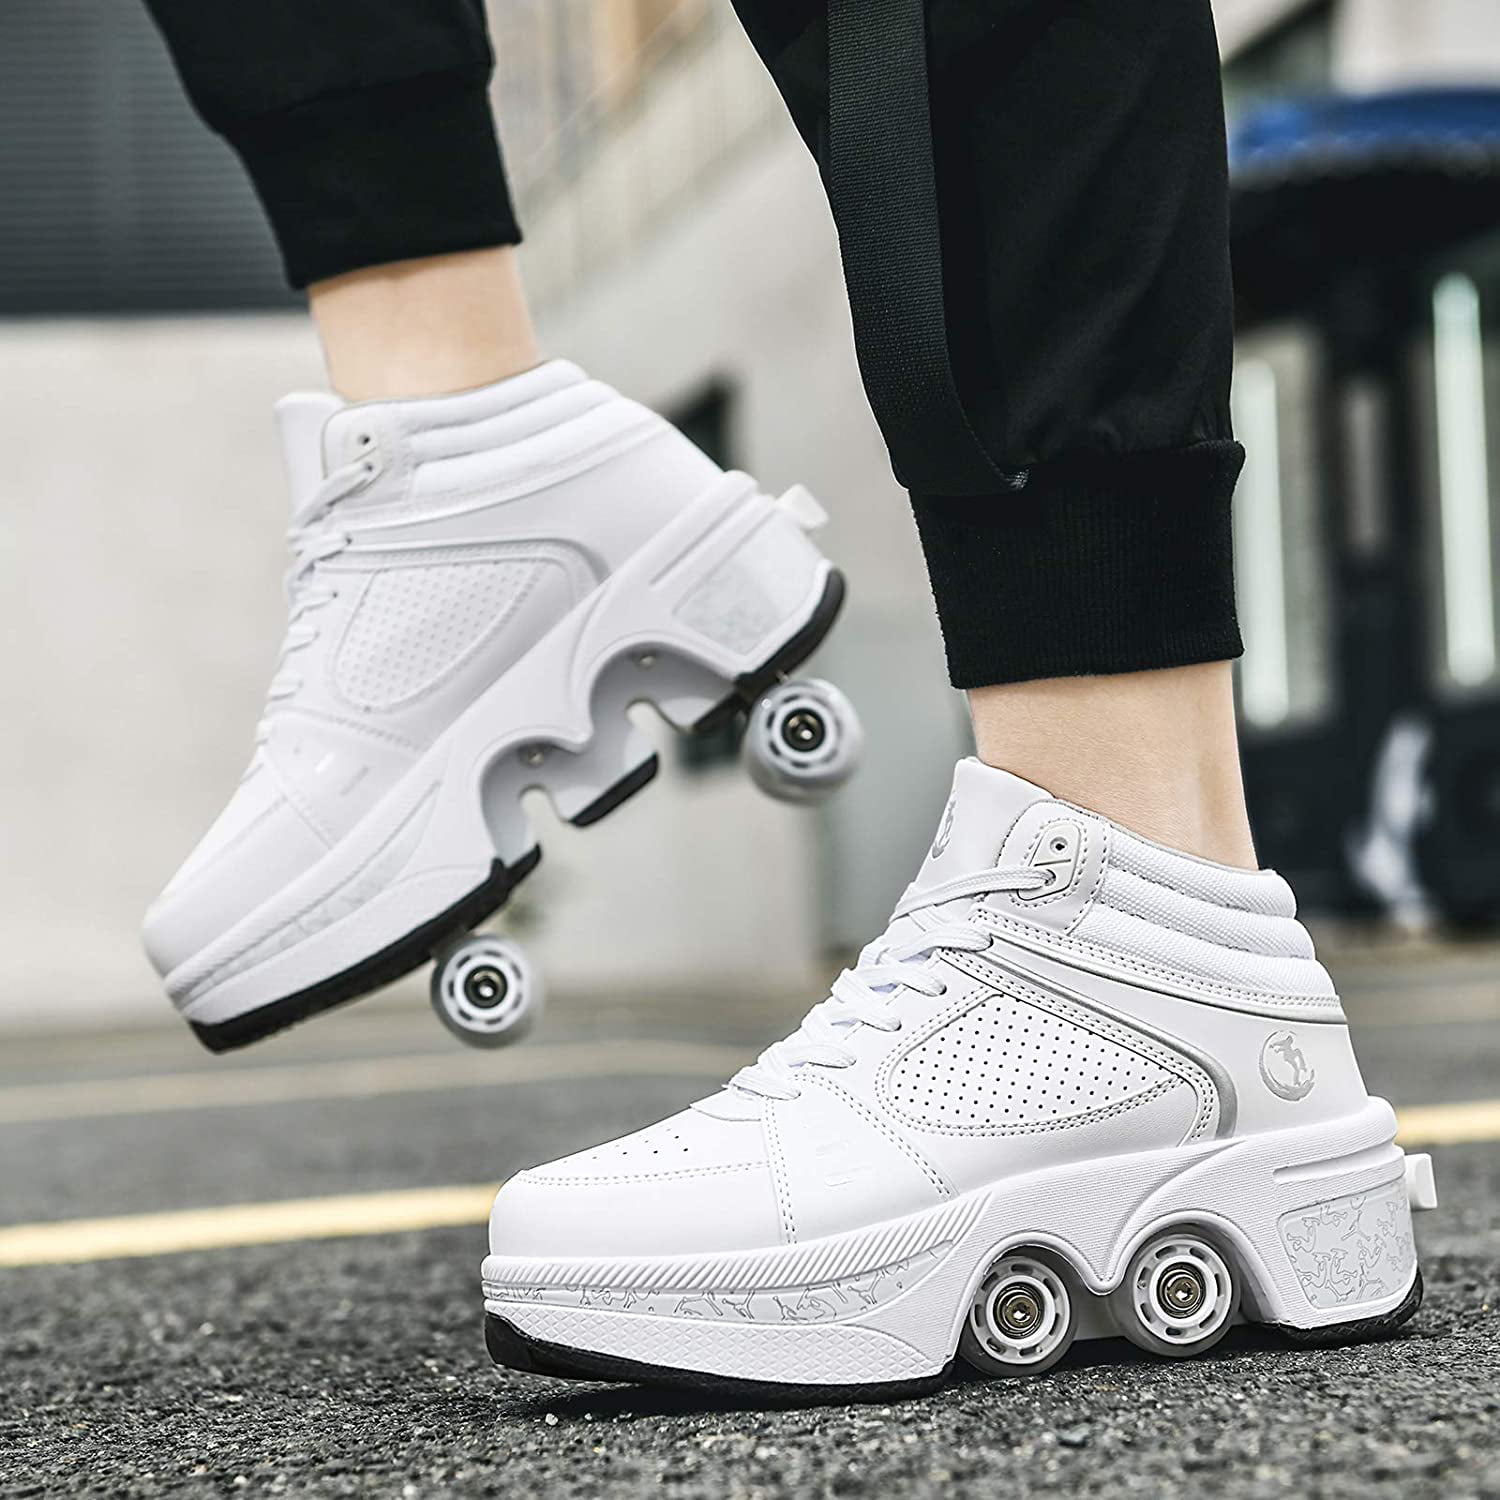 Led Roller Skate Shoes For Women Parkour Shoes Outdoor Light Shoes With Wheels For Girls/boys Shoes That Turn Into Rollerskates Deformation Roller Shoes Sneakers For Women 